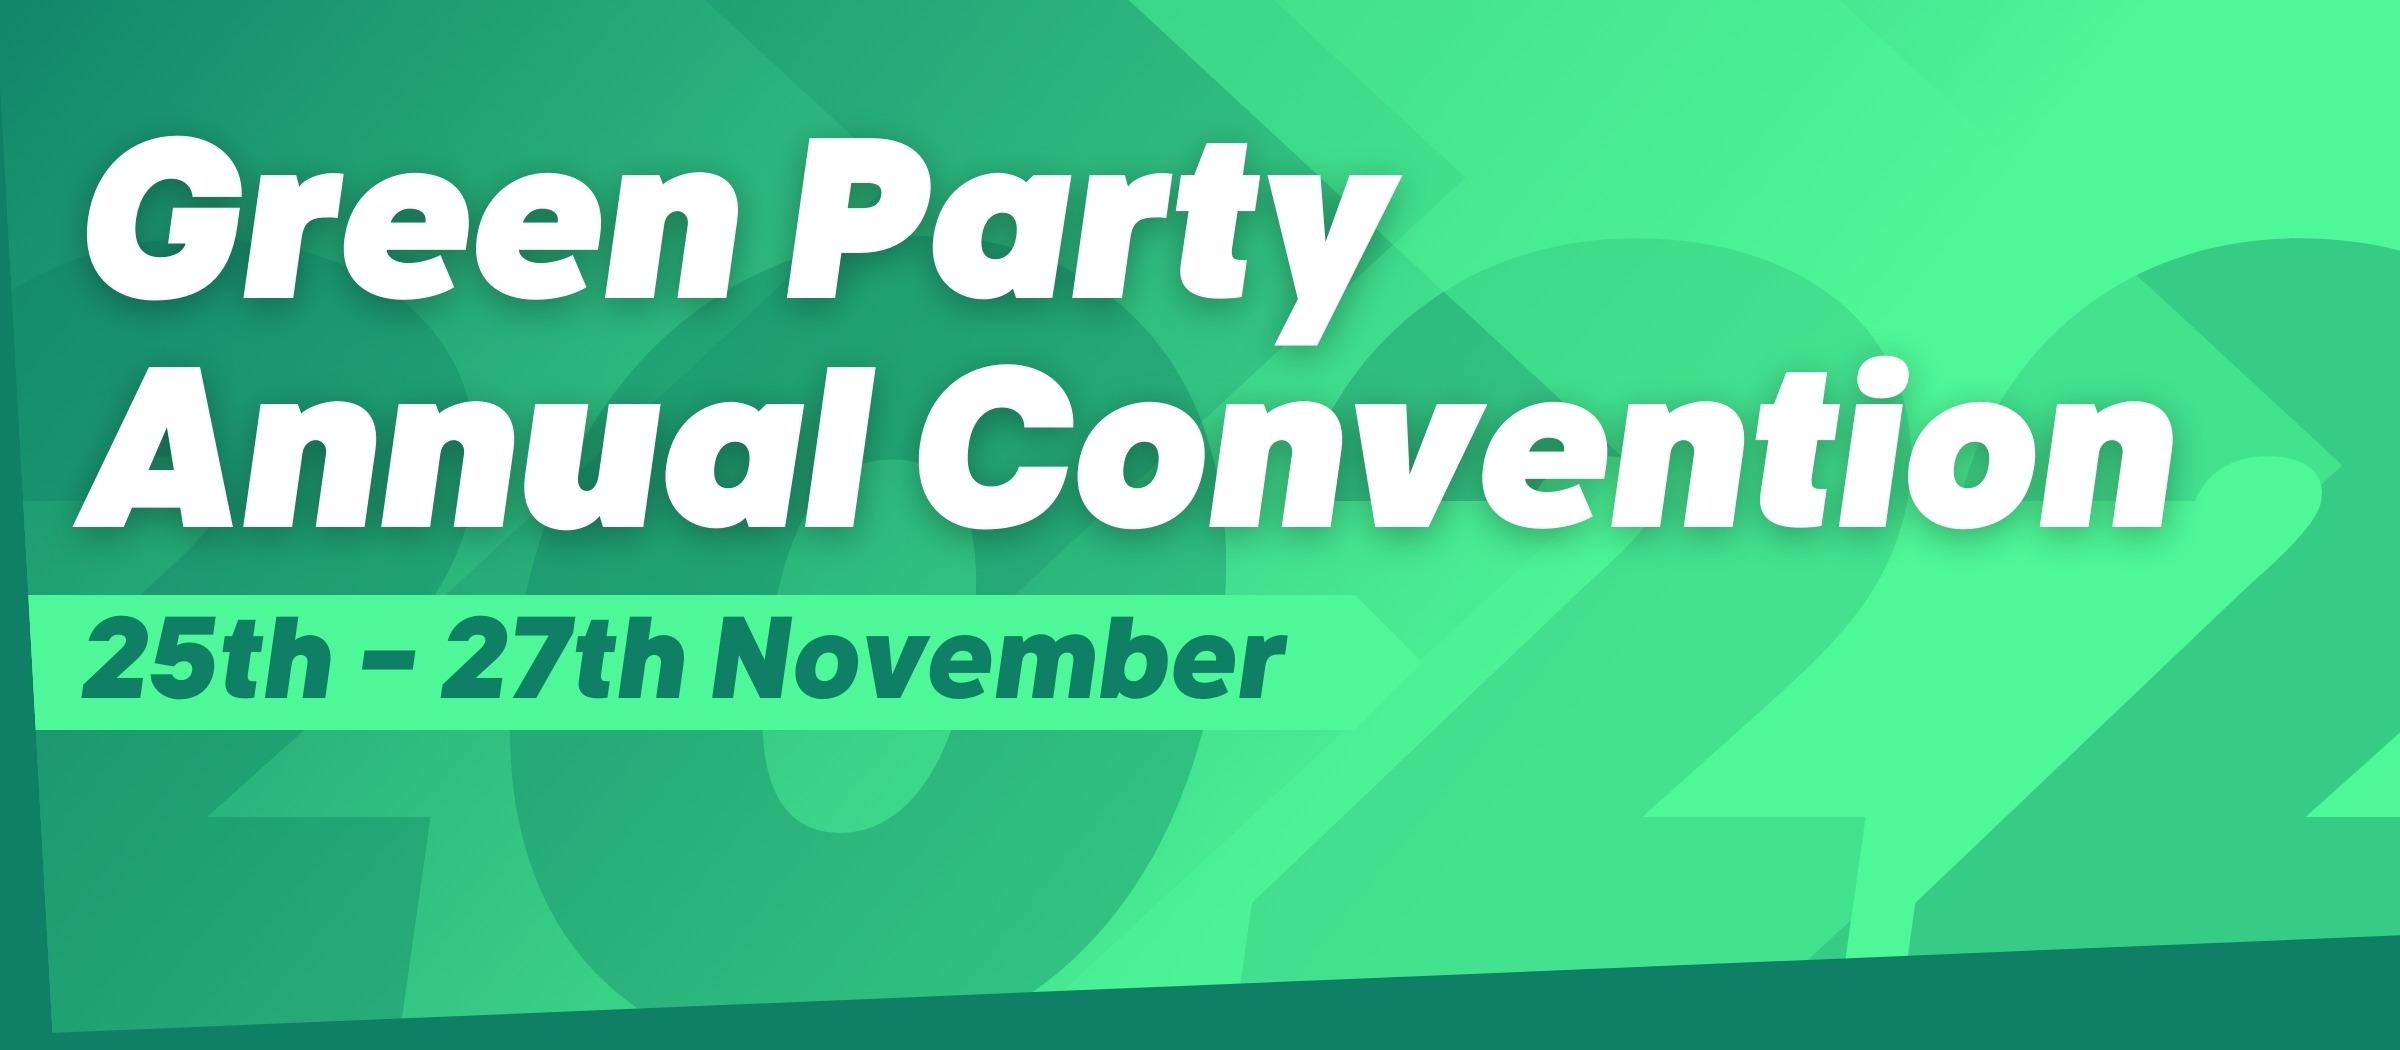 GREEN PARTY ANNUAL CONVENTION 2022 LOGO